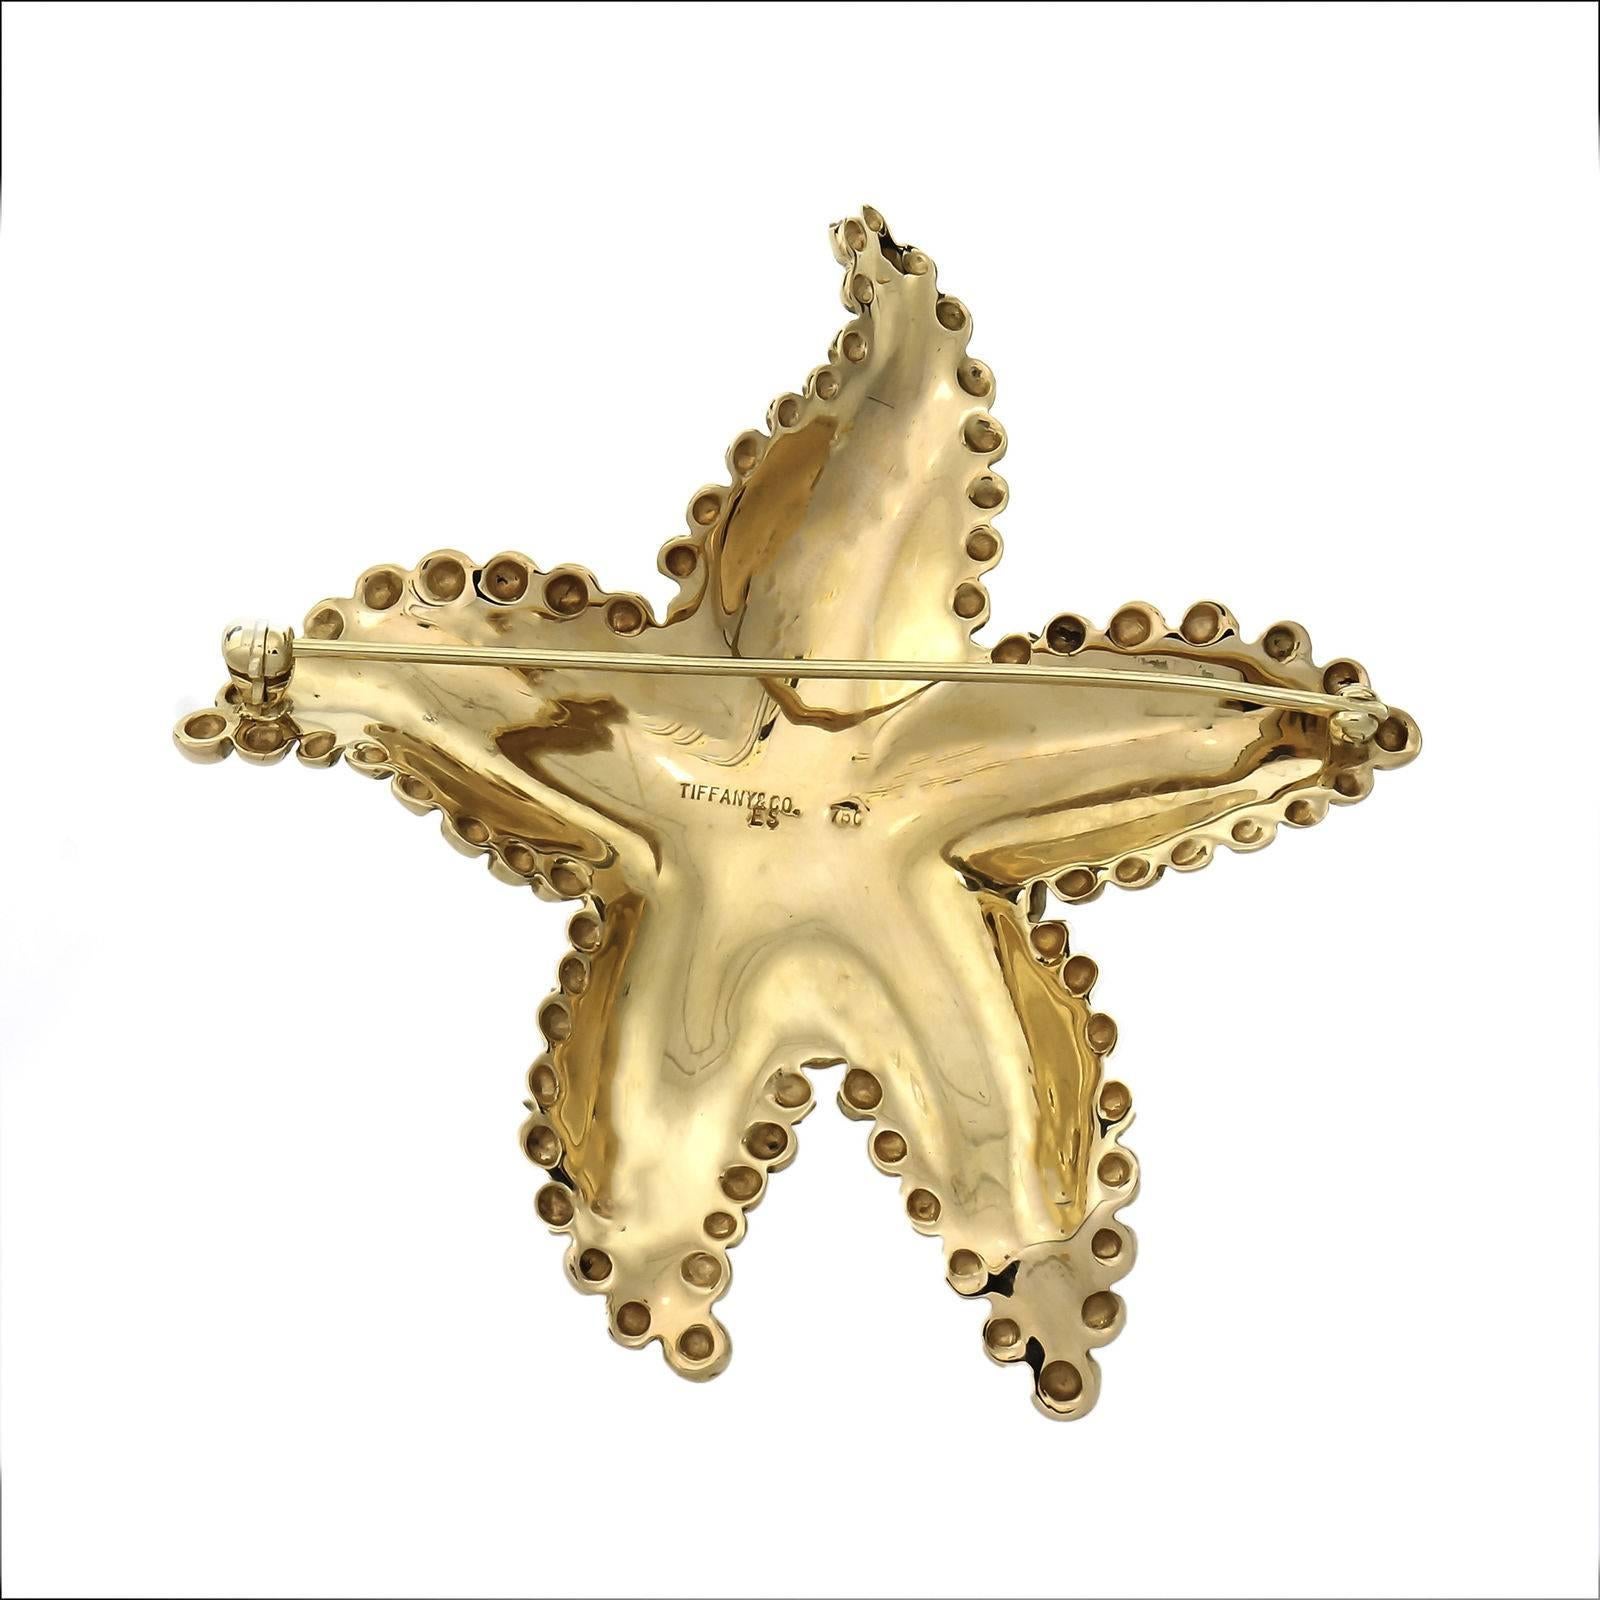 Tiffany & Co 1970’s large textured Star Fish brooch in solid 18k yellow gold. 

18k yellow gold
Top to bottom: 64.75mm or 2.55 inches
Width: 62.55mm or 2.46 inches
Depth: 6.18mm
27.8 grams
Tested: 18k
Stamped: 750
Hallmark: Tiffany & Co